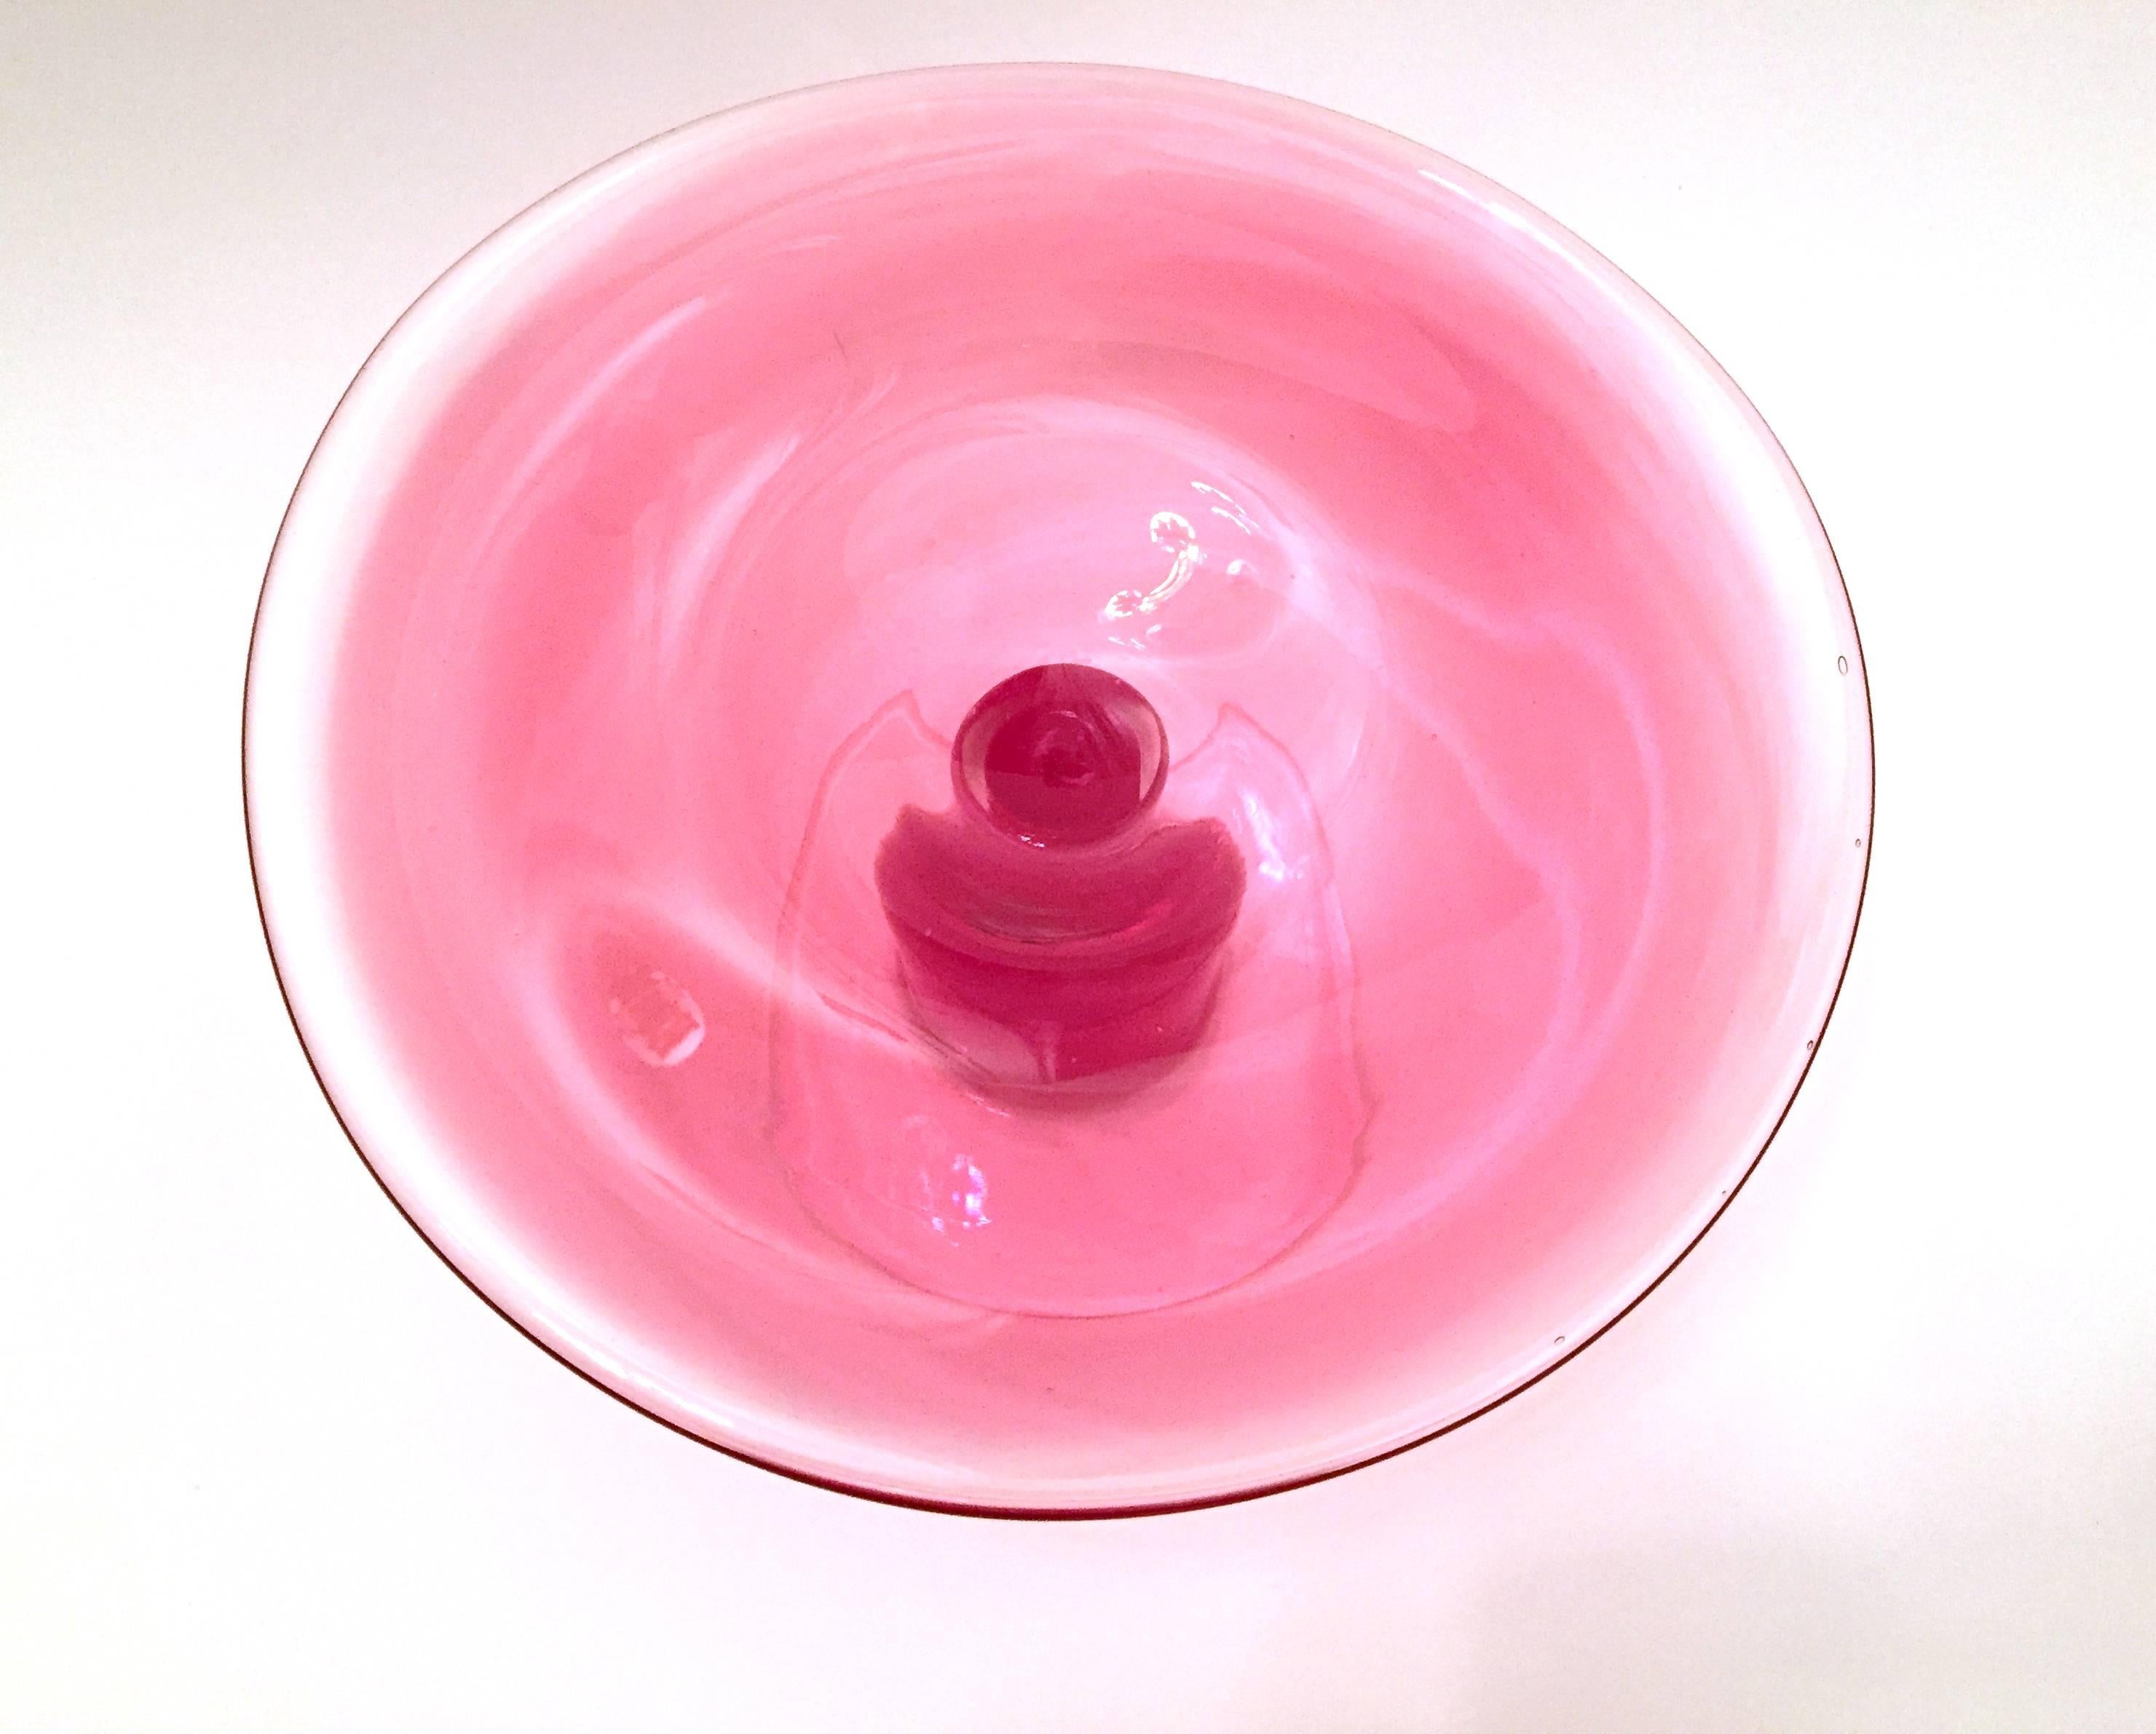 A handmade cake plateau in light pink and fiery red glass by Erik Höglund (1932-1998) for Chribska Sweden. Signed and dated 1992.